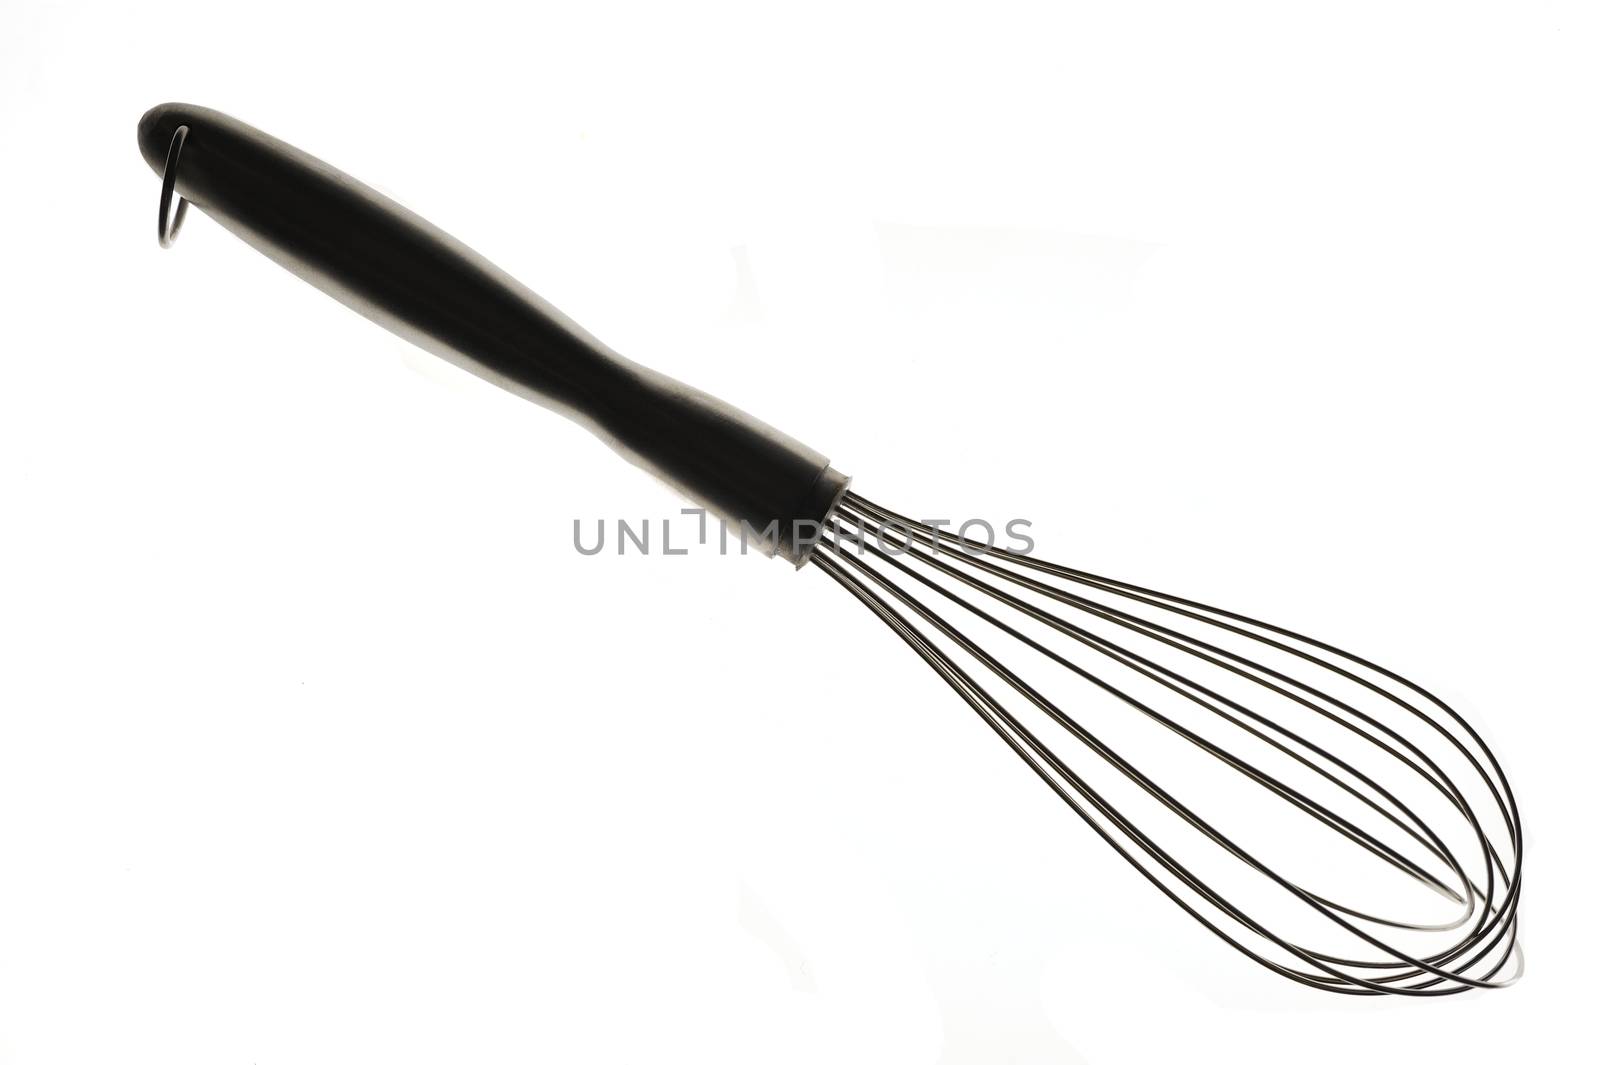 Houseware: steel whisk, isolated on white background